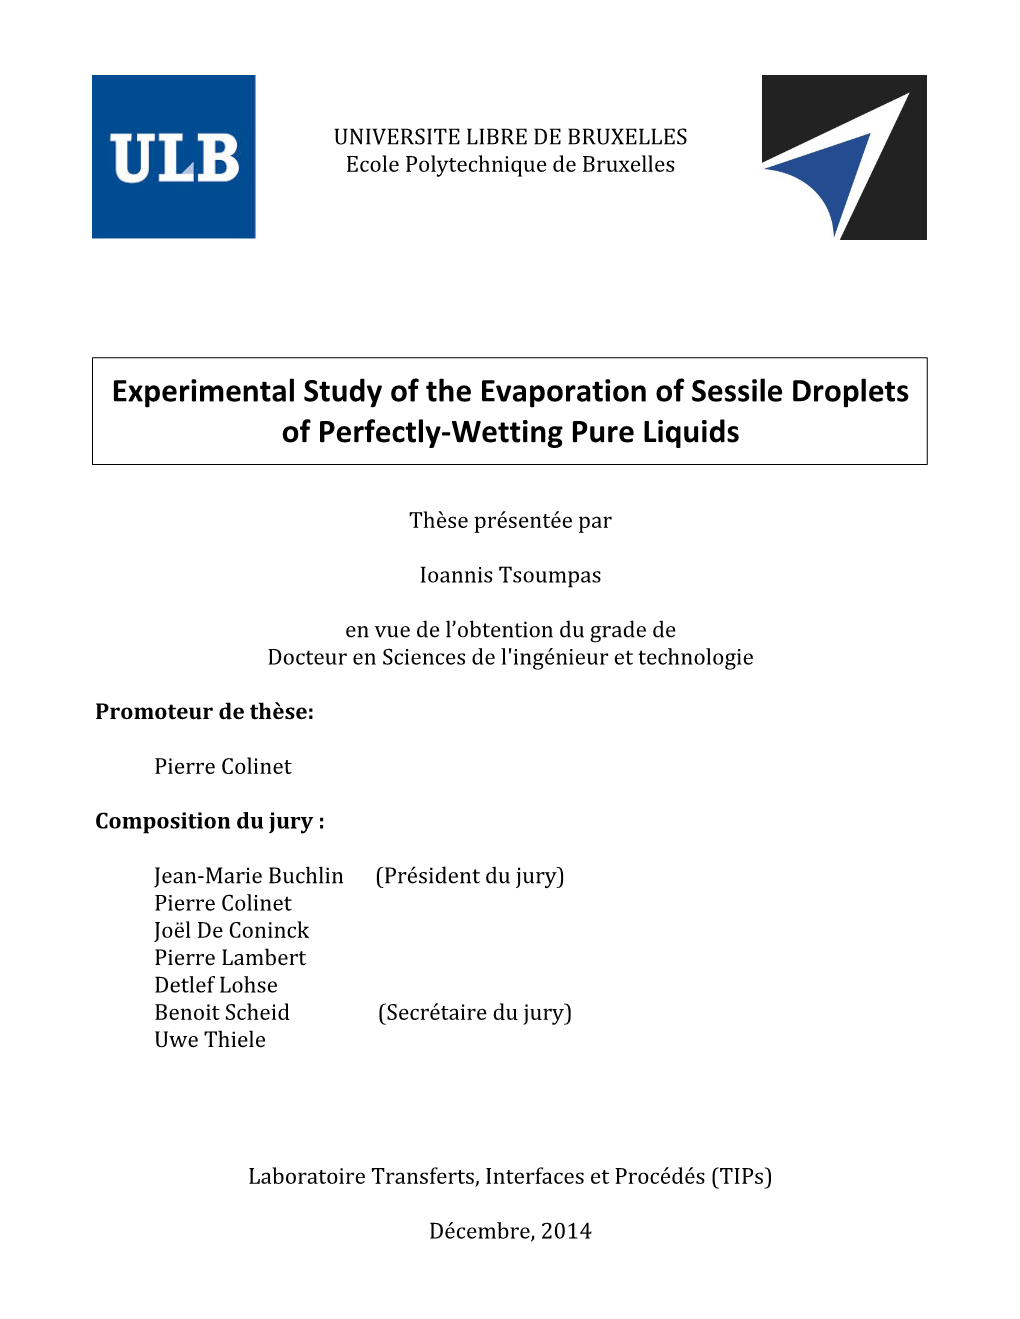 Experimental Study of the Evaporation of Sessile Droplets of Perfectly-Wetting Pure Liquids